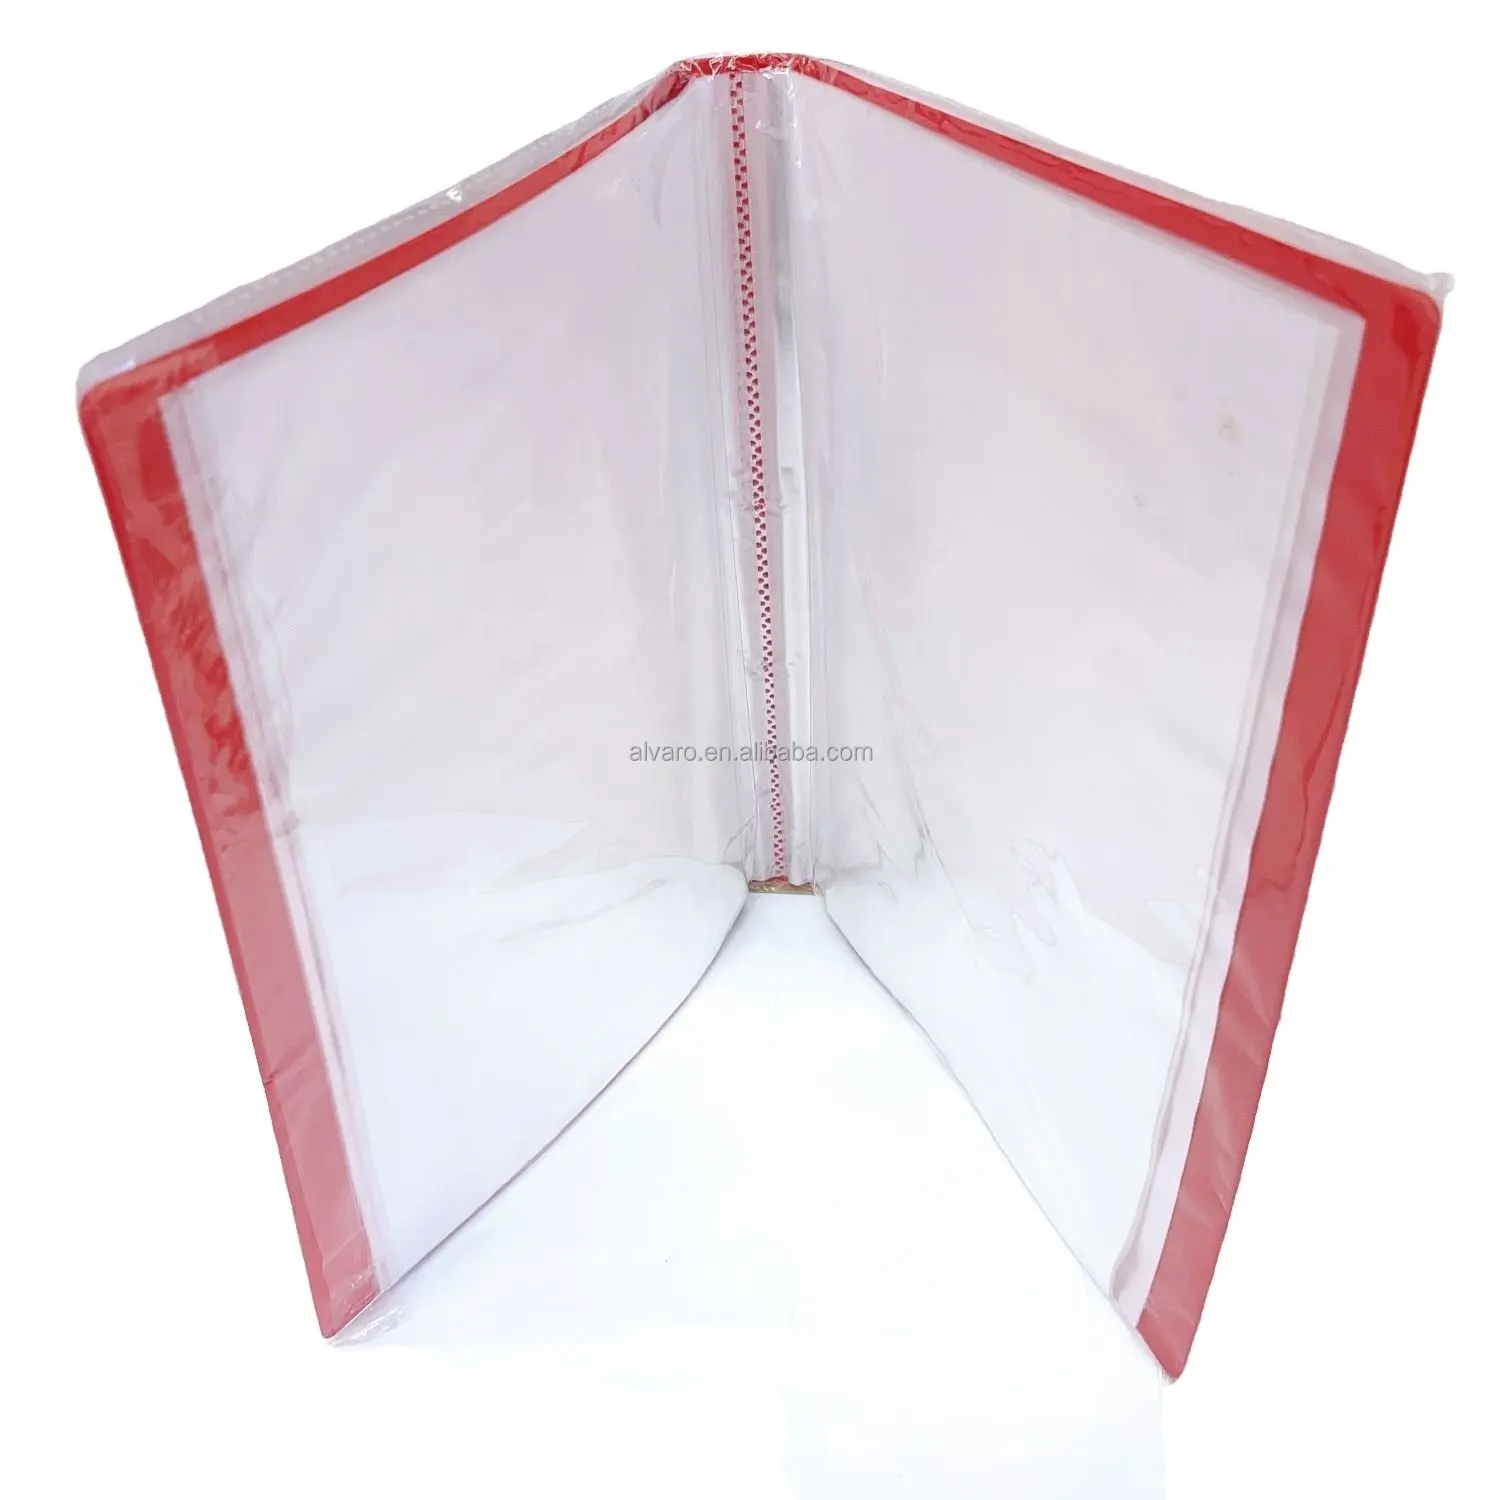 Office business file storage school stationery durable waterproof 60 clear pockets A4 size file folder Display book